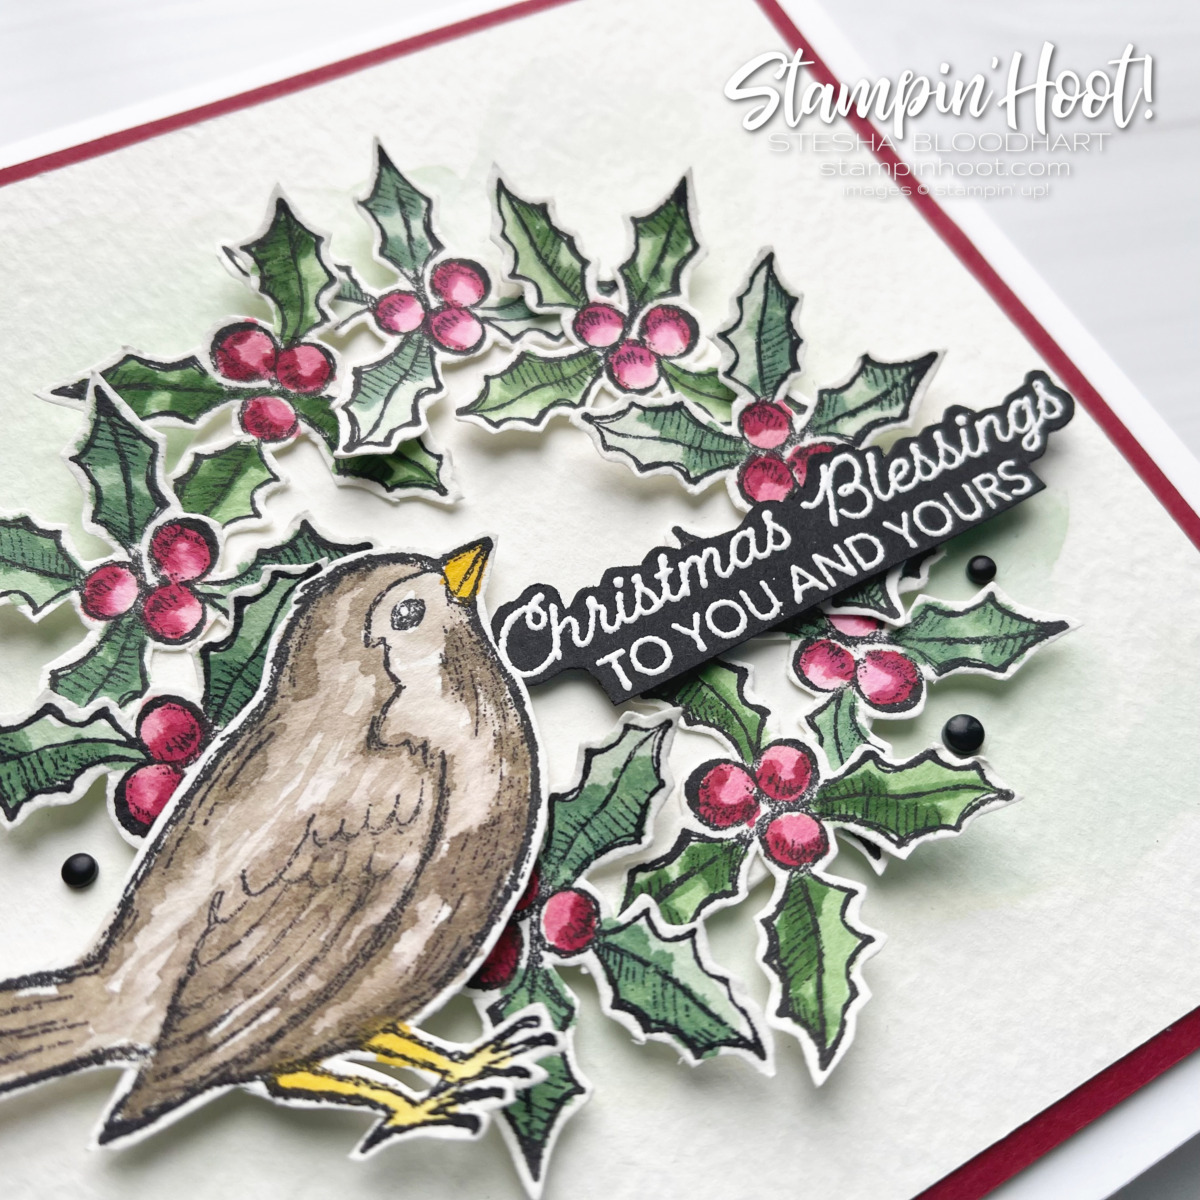 Create this card using the Happy Holly-Days Stamp Set by Stampin' Up! Retires January 3, 2022. GDP321 Garden Green, Mint Macaron, Cherry Cobbler